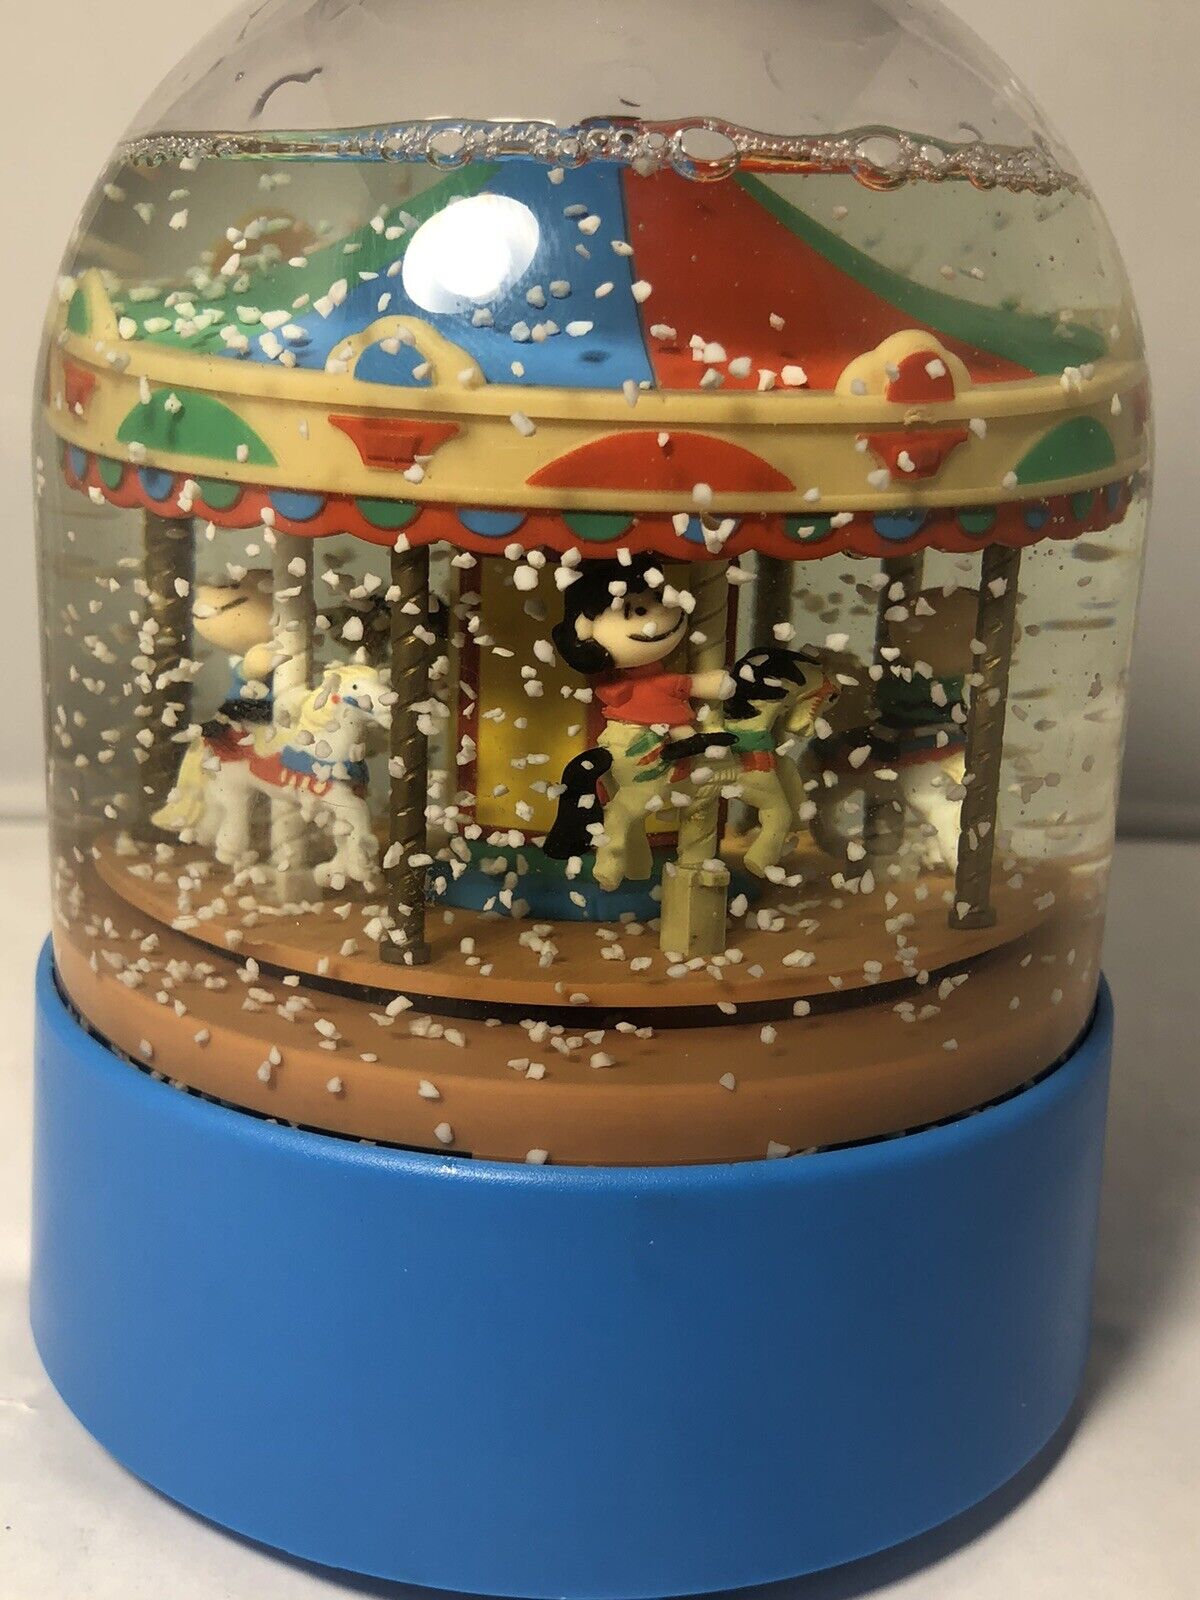 Vintage Peanuts Musical Snow Globe By Charles Schulz w/Up & Down Action Rare